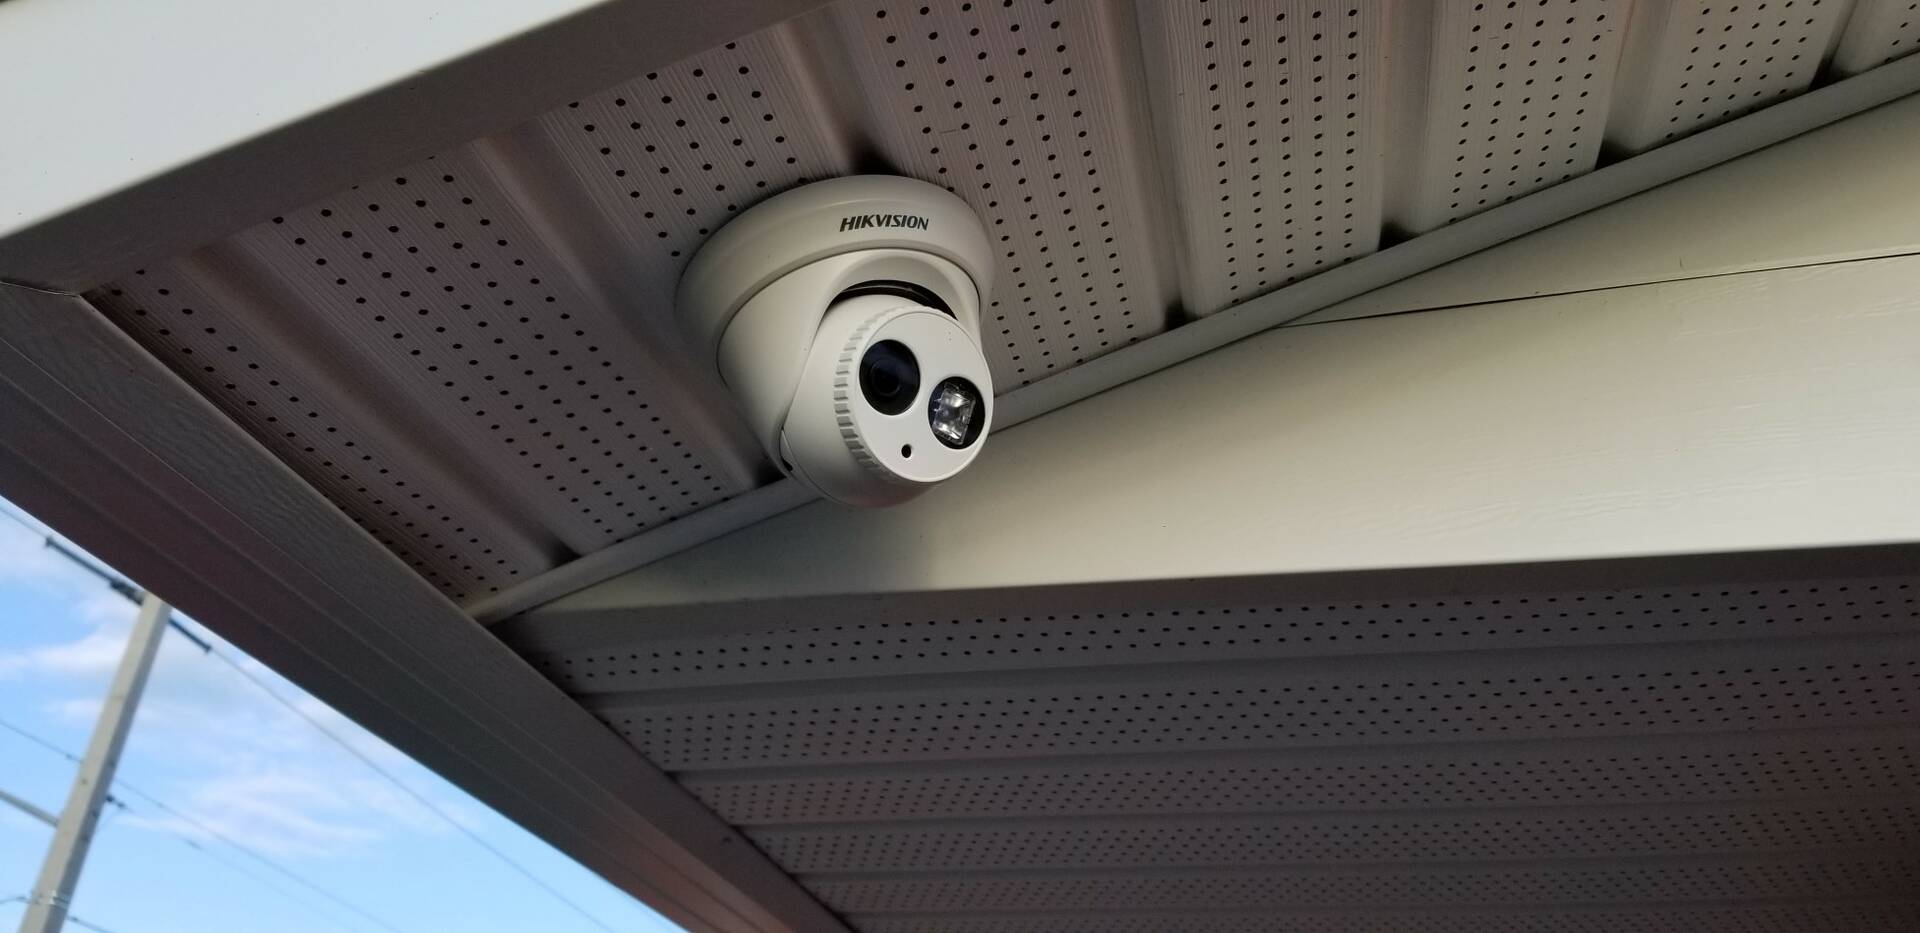 Advanced Video Security Systems